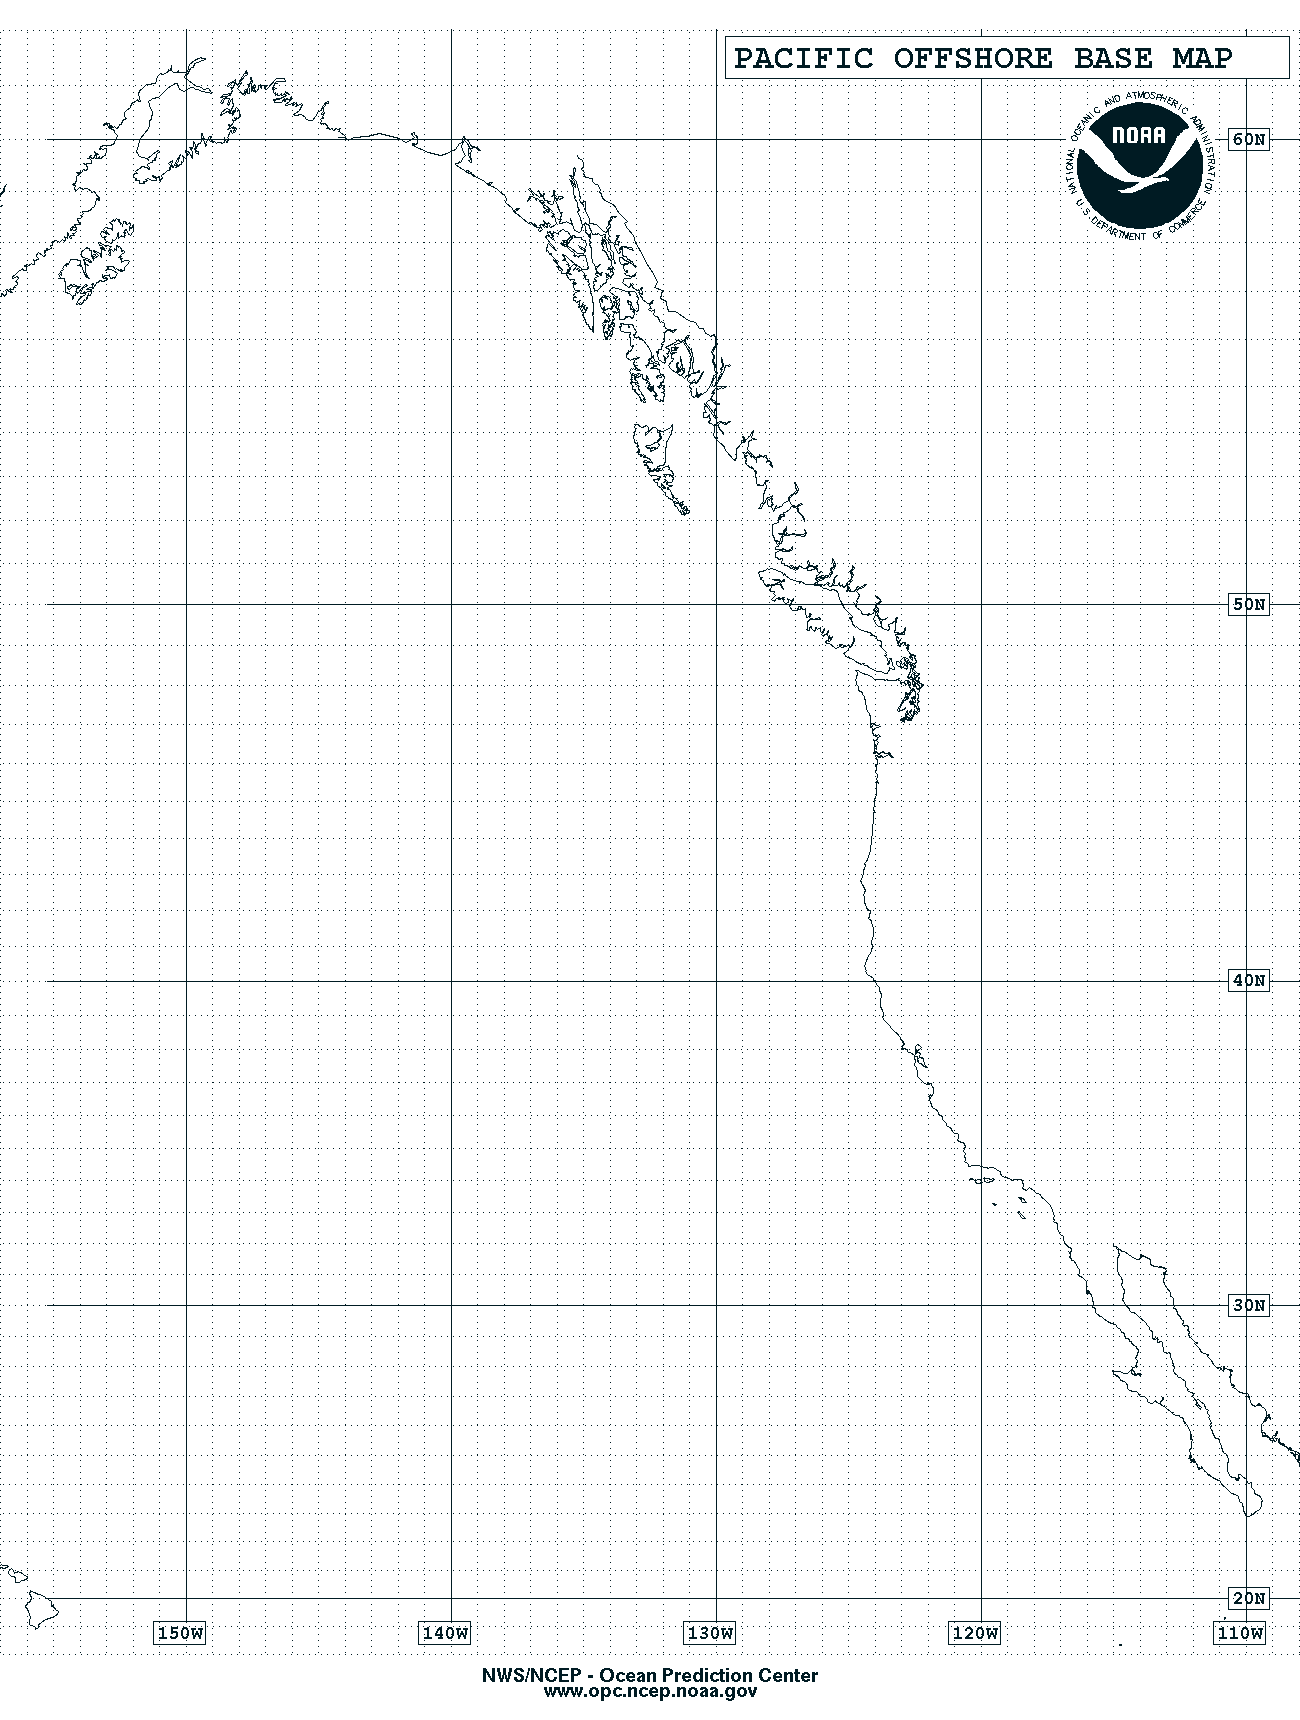 Pacific Offshore blank base map